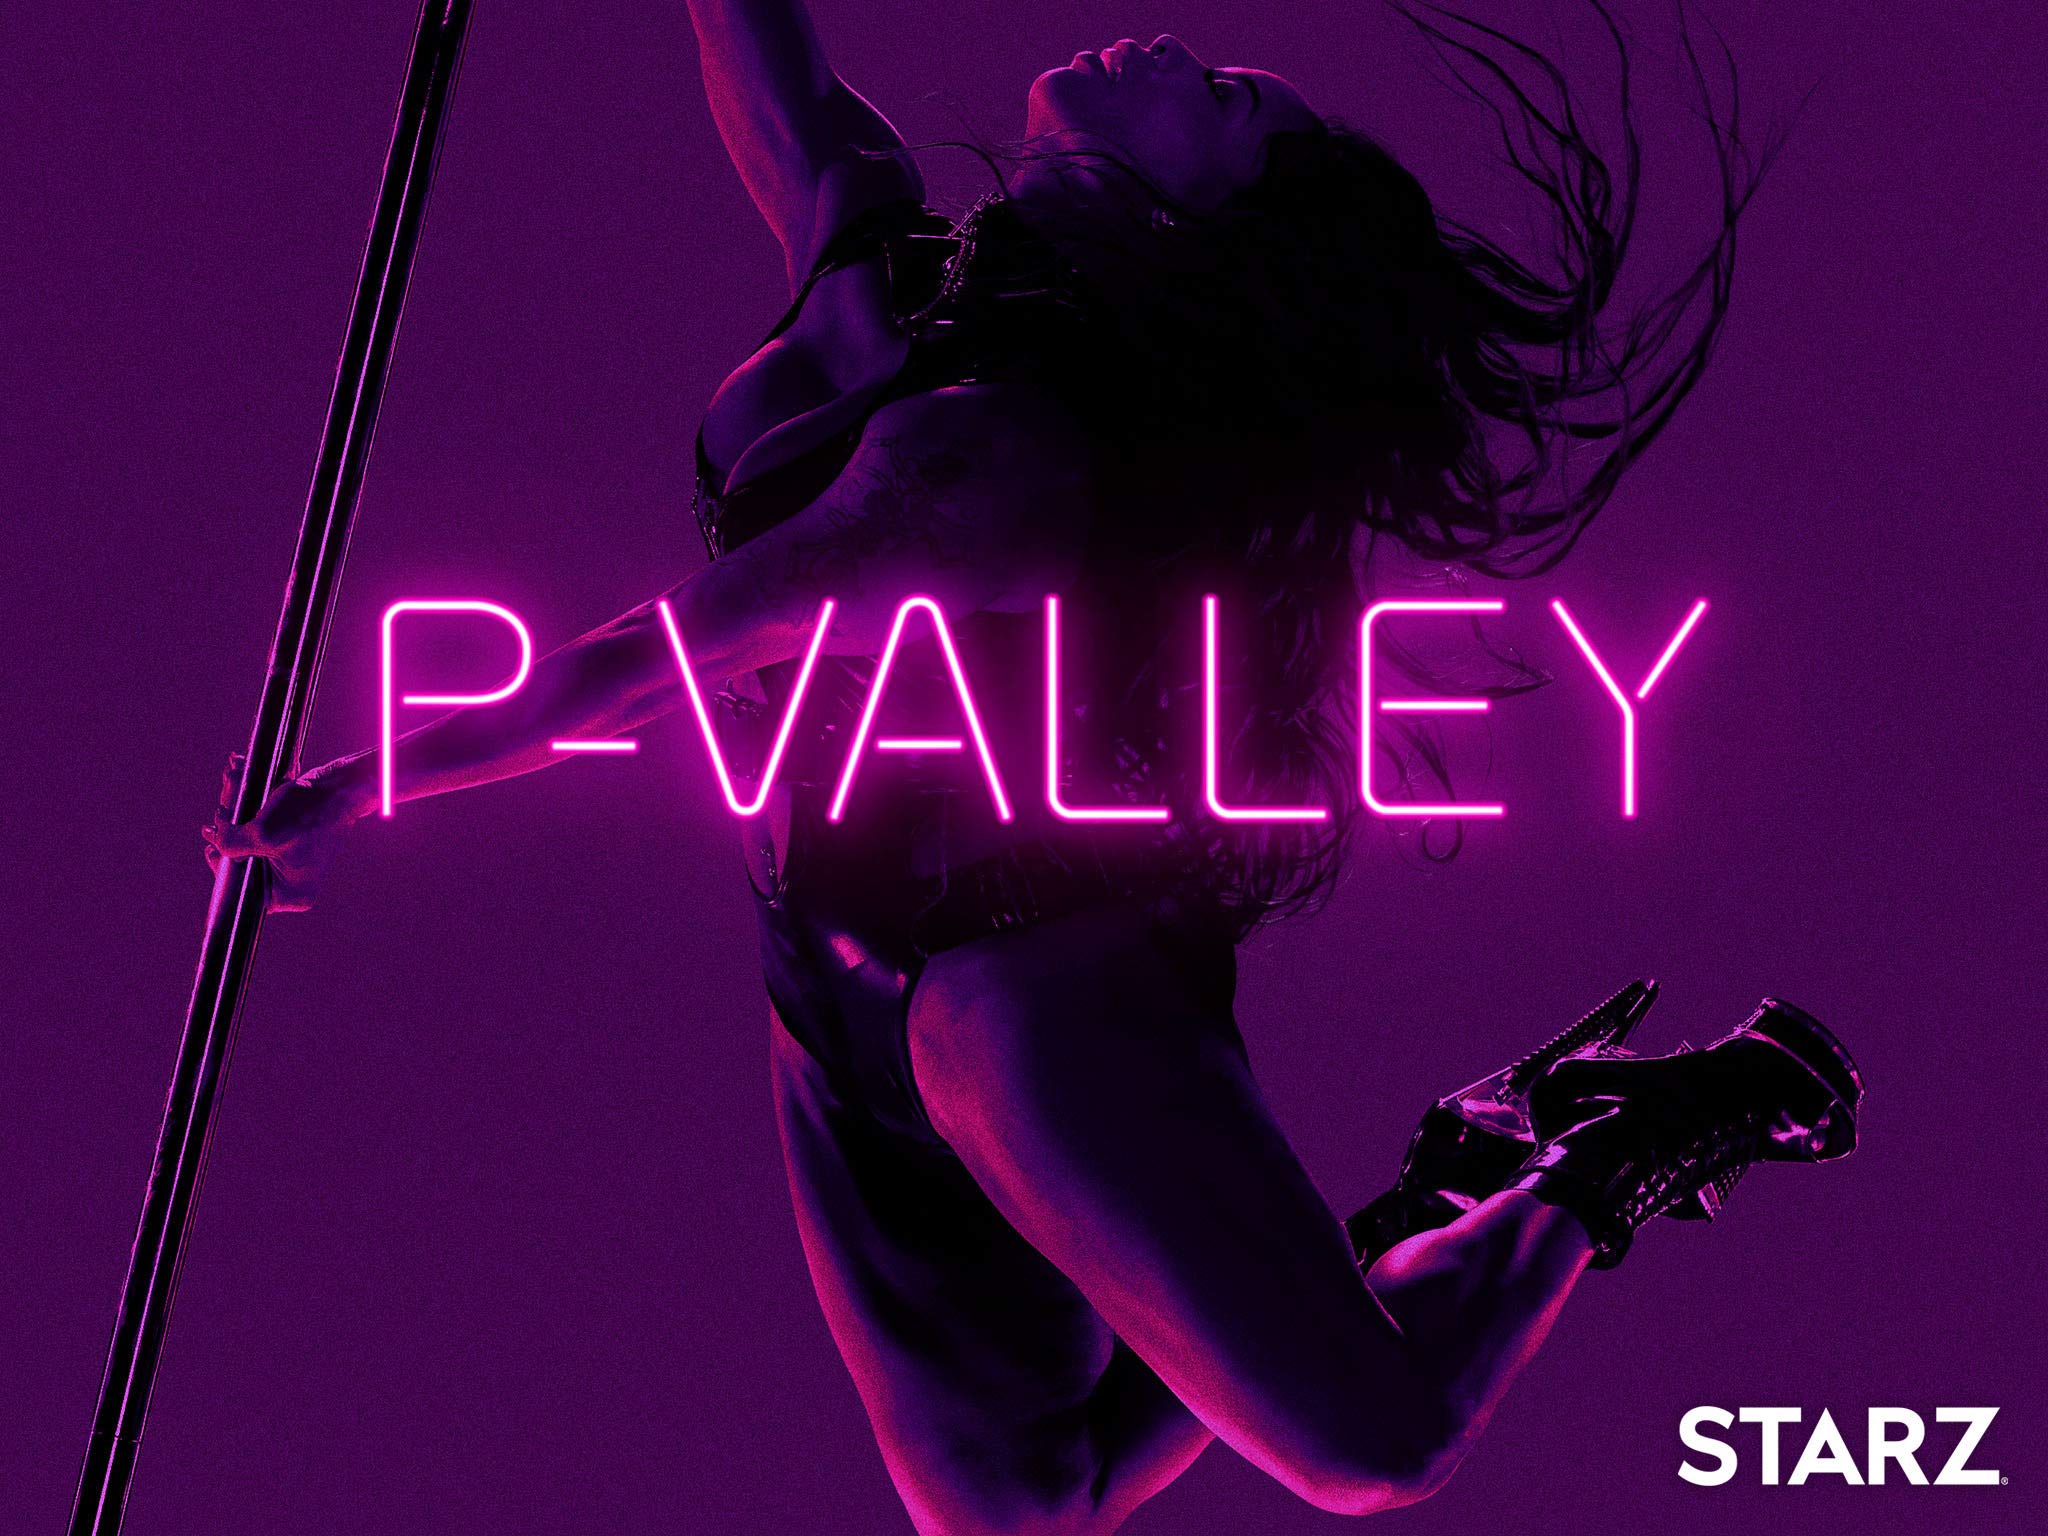 P-Valley Release Date & More – When Is The New Season Coming On Starz?